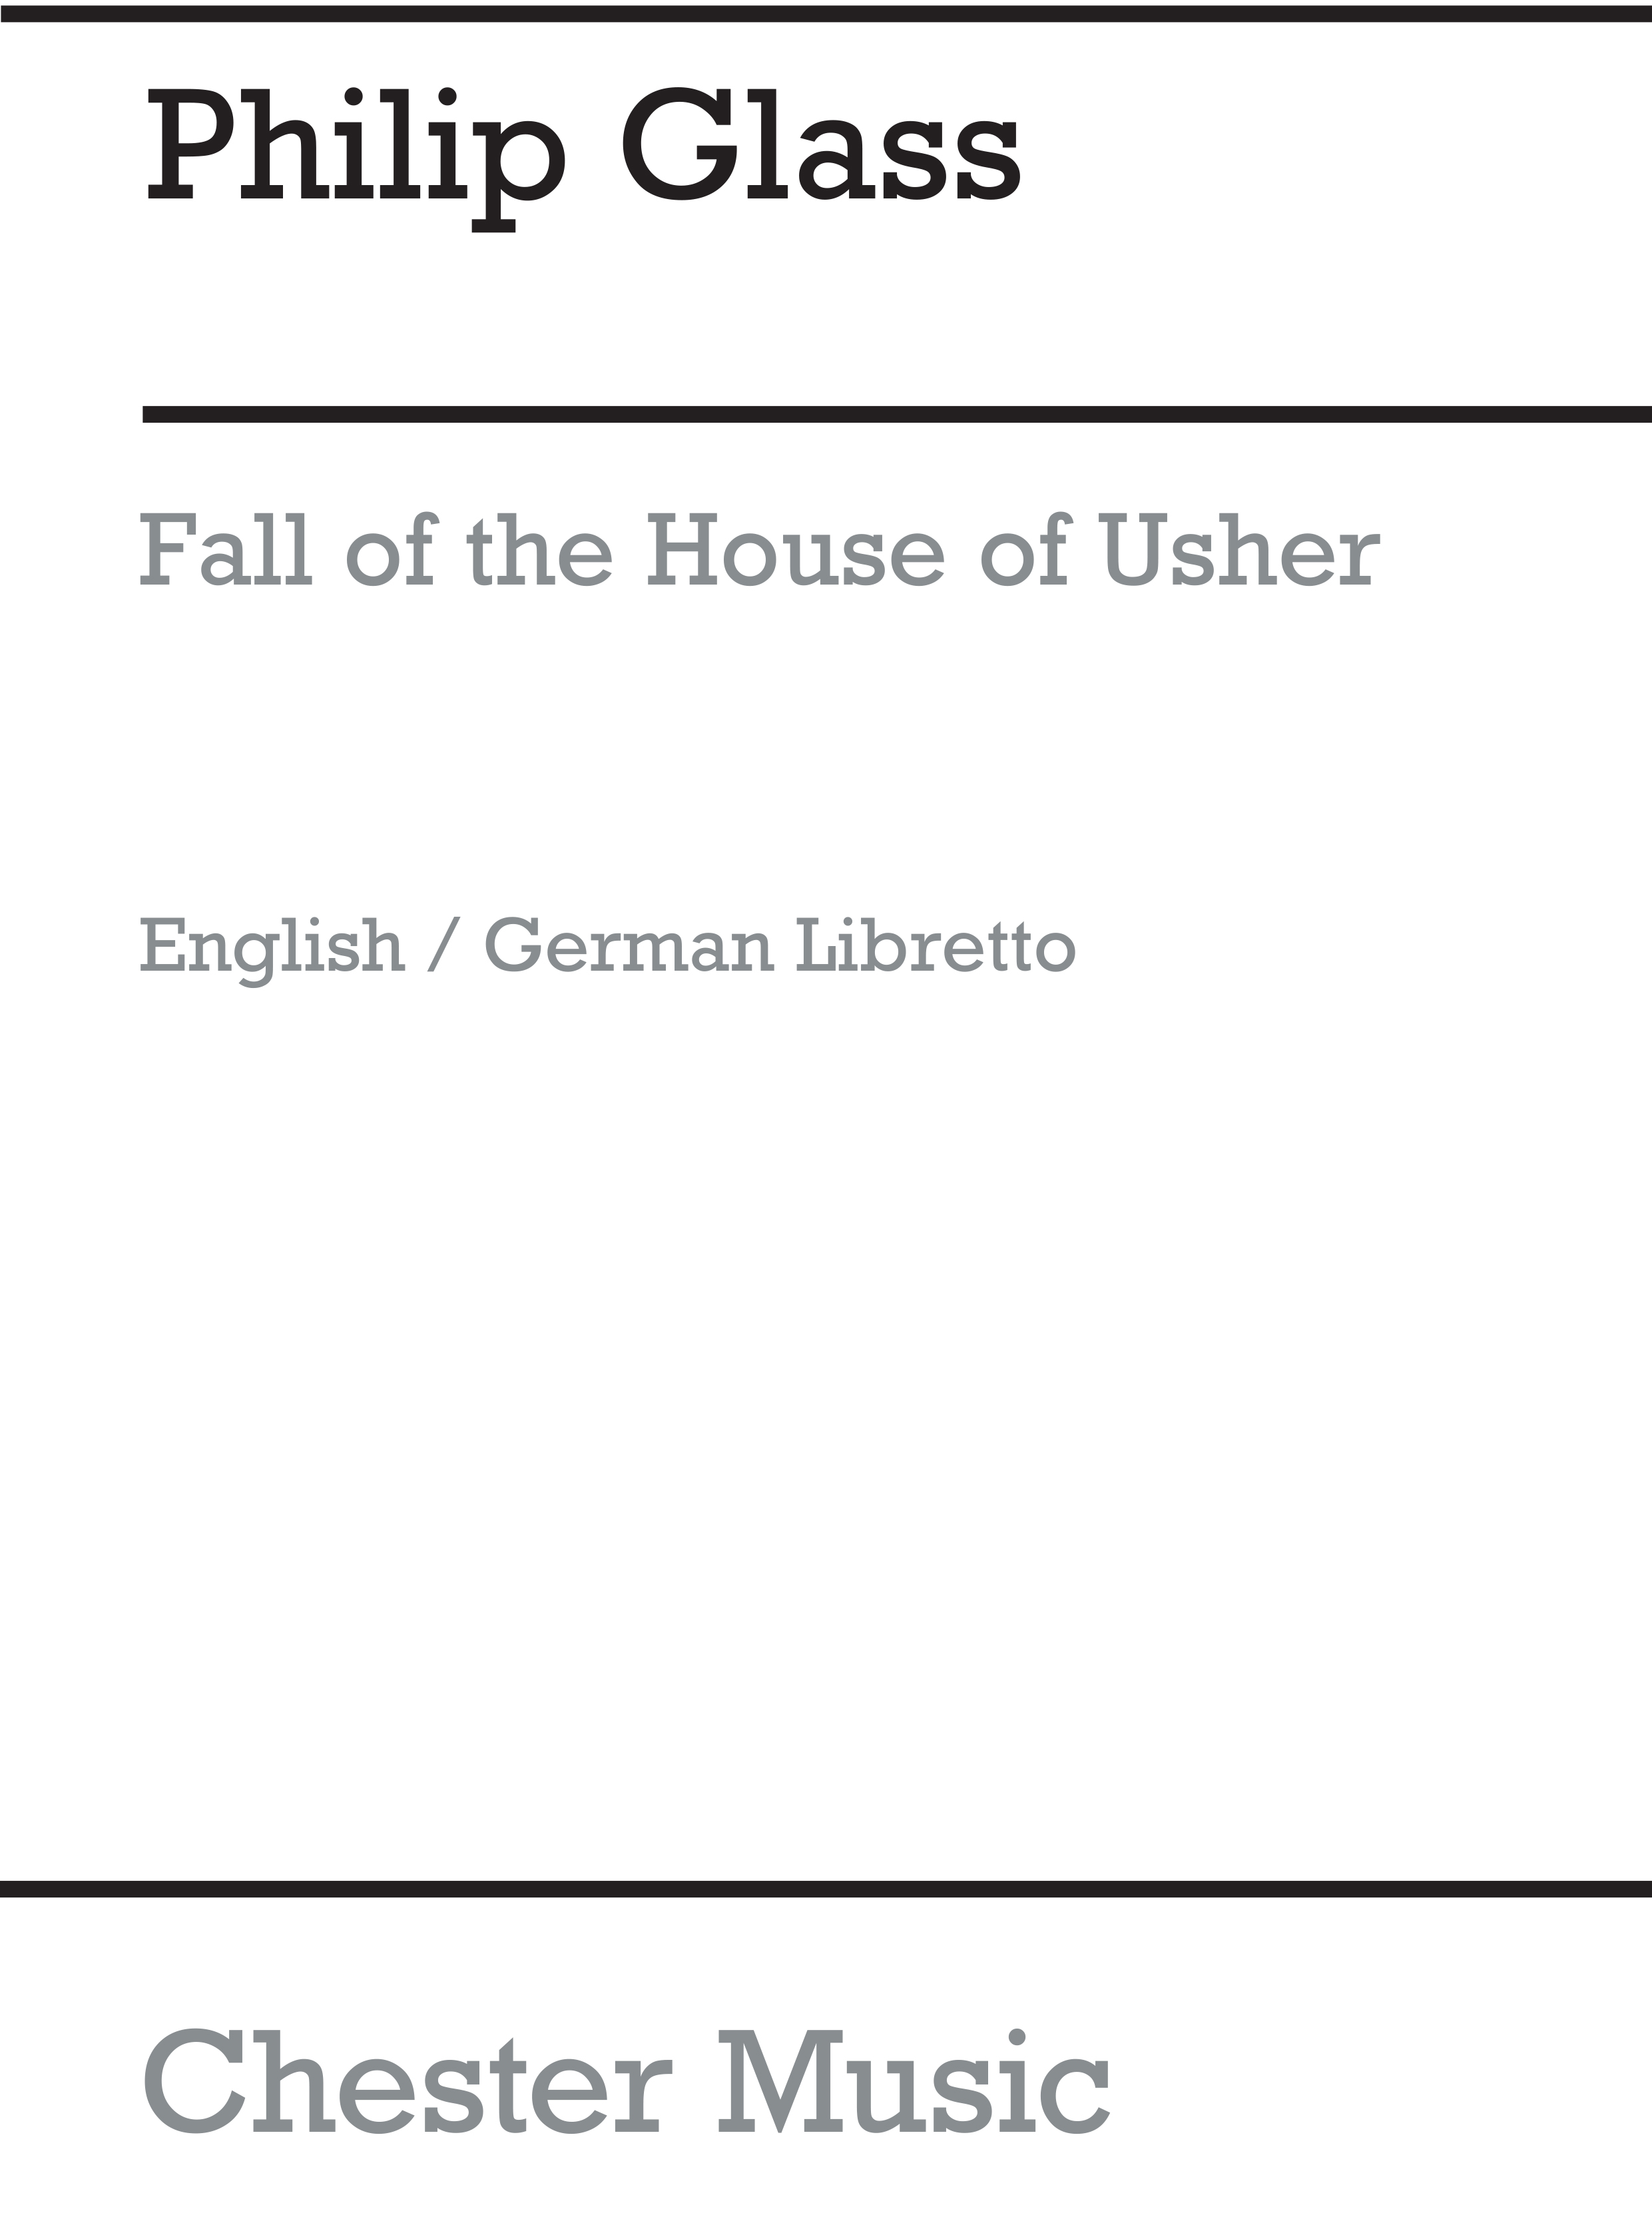 Philip Glass: Glass The Fall Of The House Of Usher (e) Libretto: Orchestra: